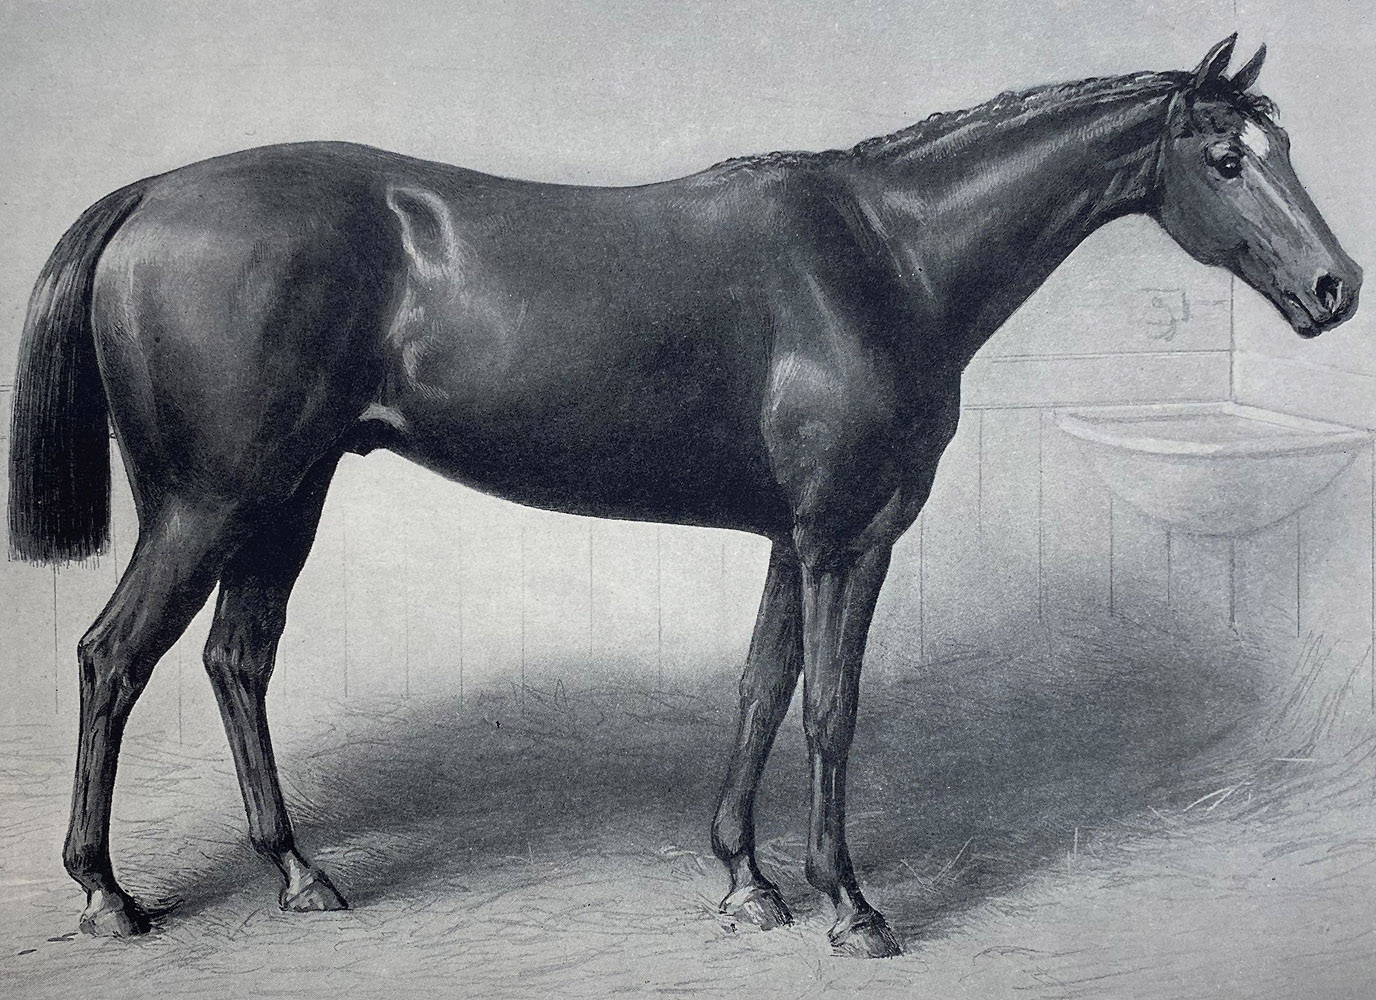 Illustration of Longfellow from "Racing in America, 1866-1921" (Museum Collection)